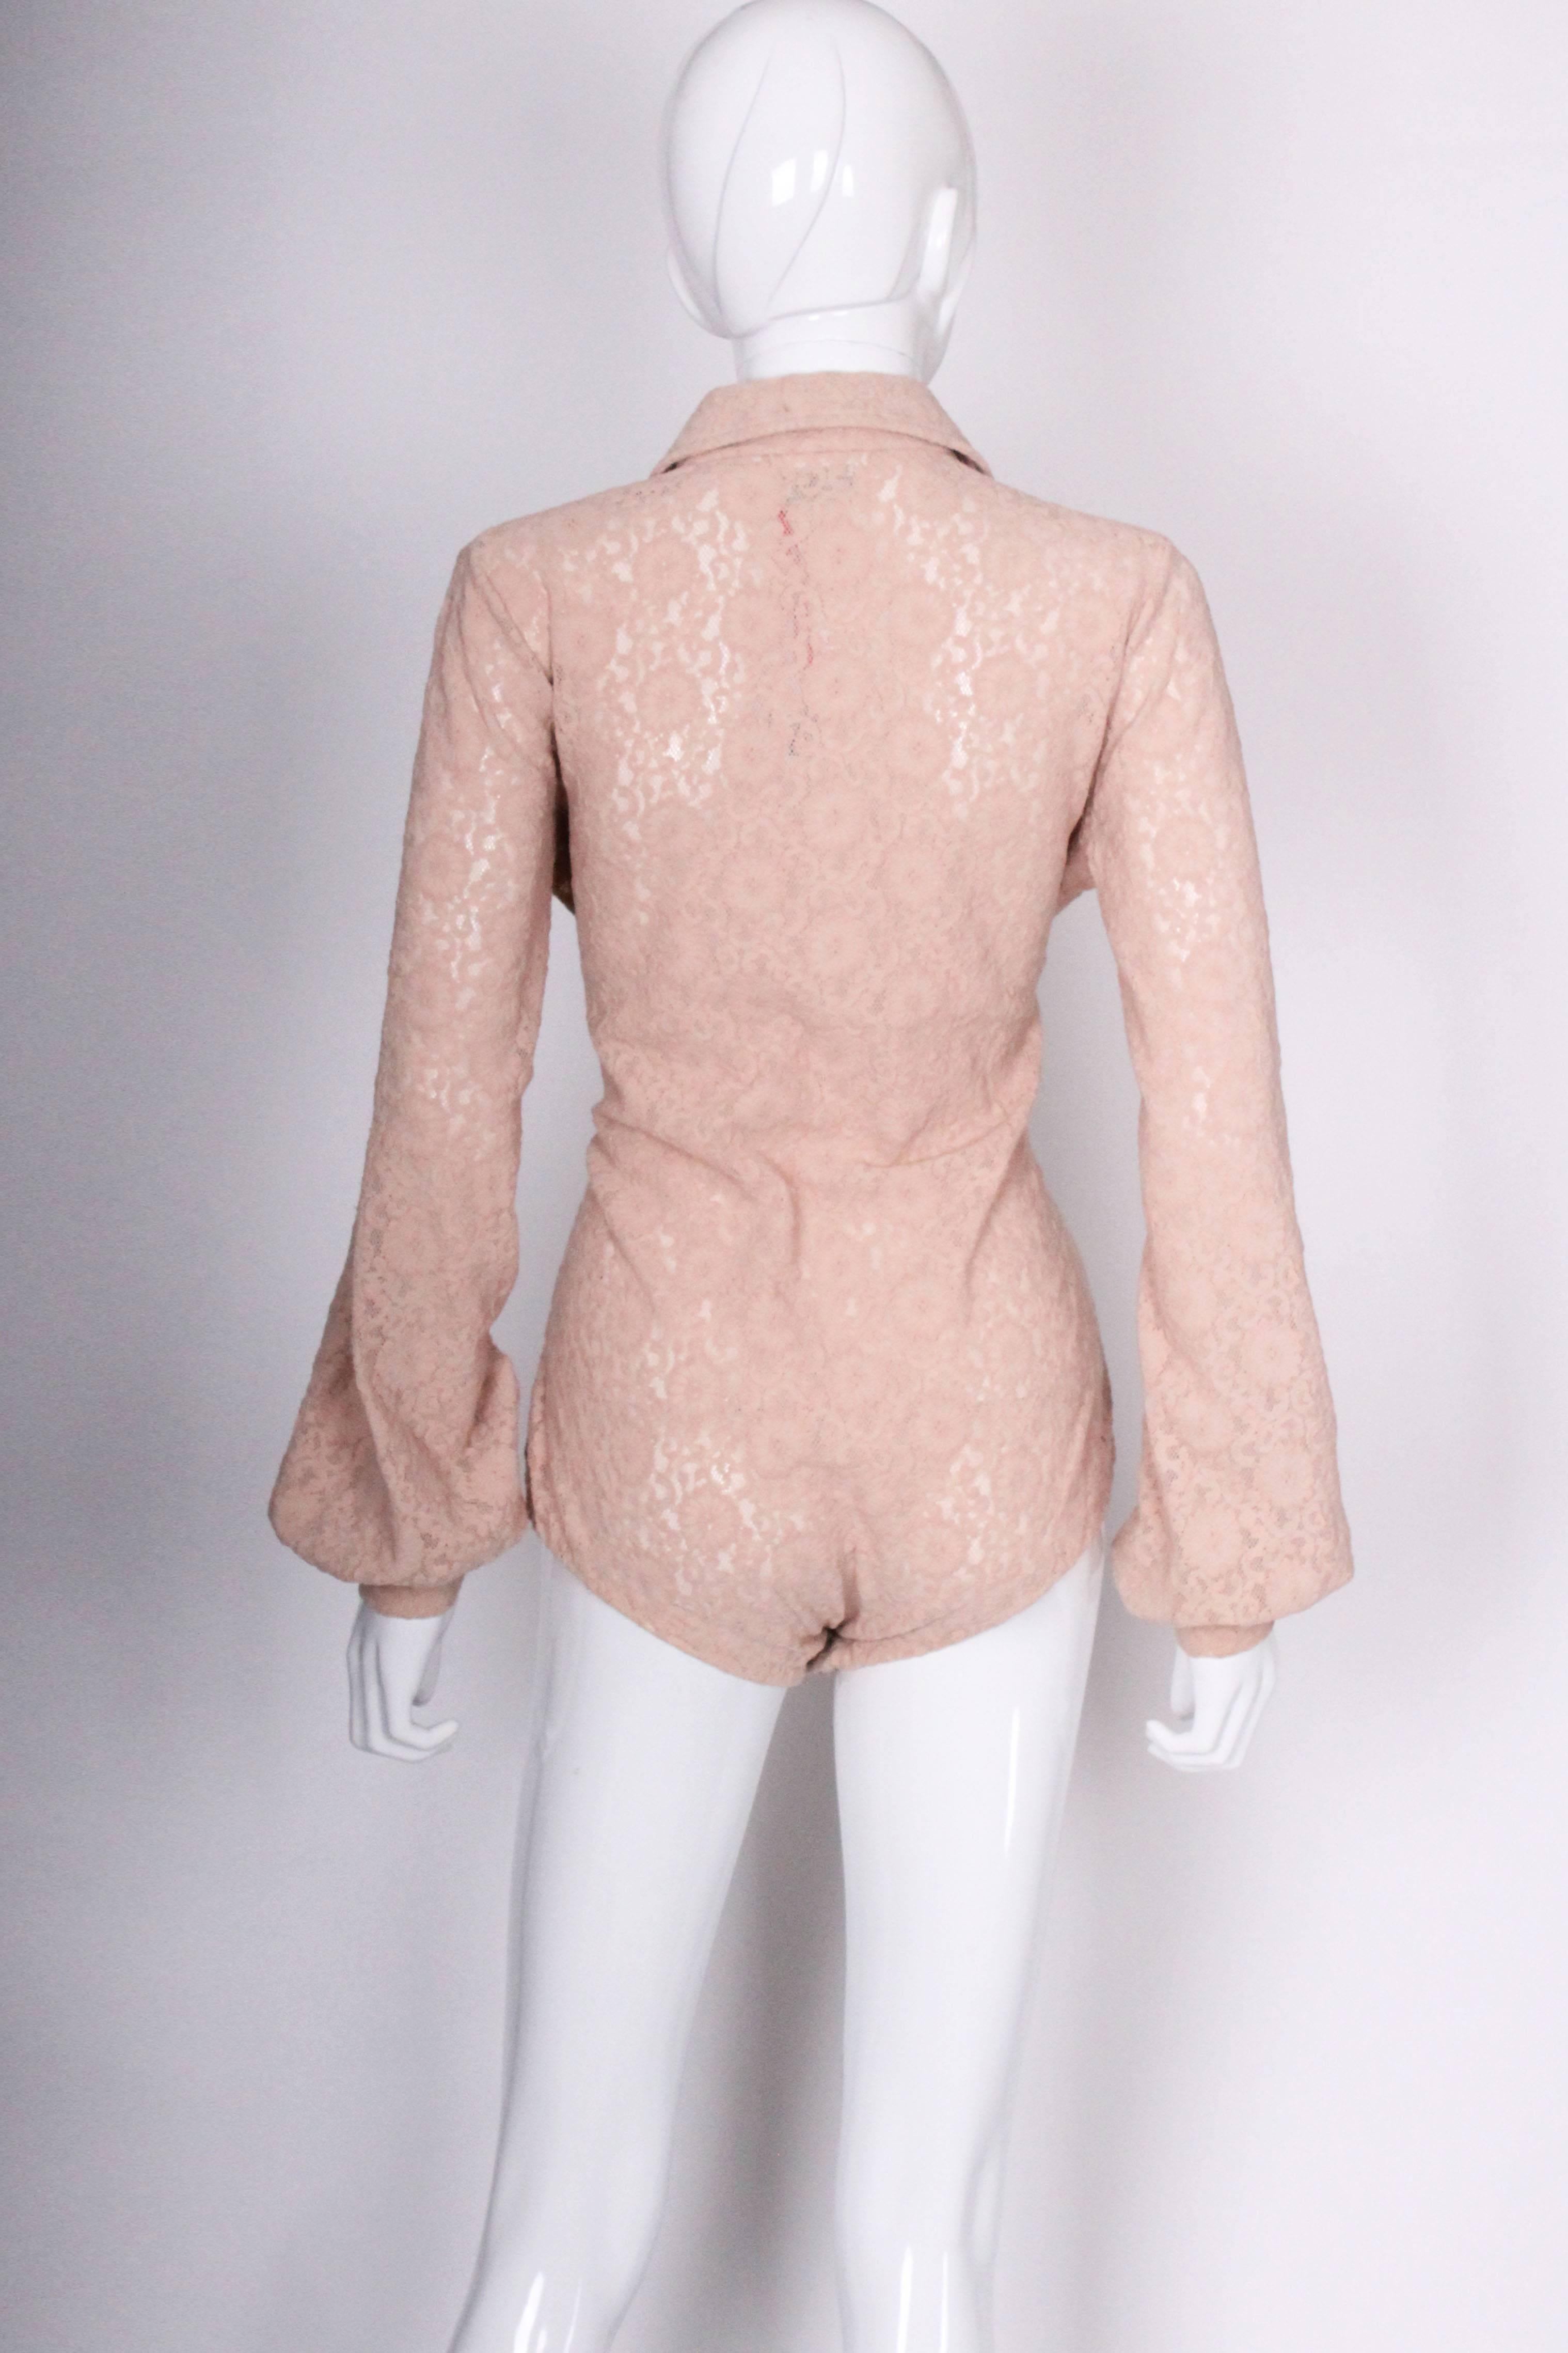 Women's 1980s Lace Body By Christian Dior